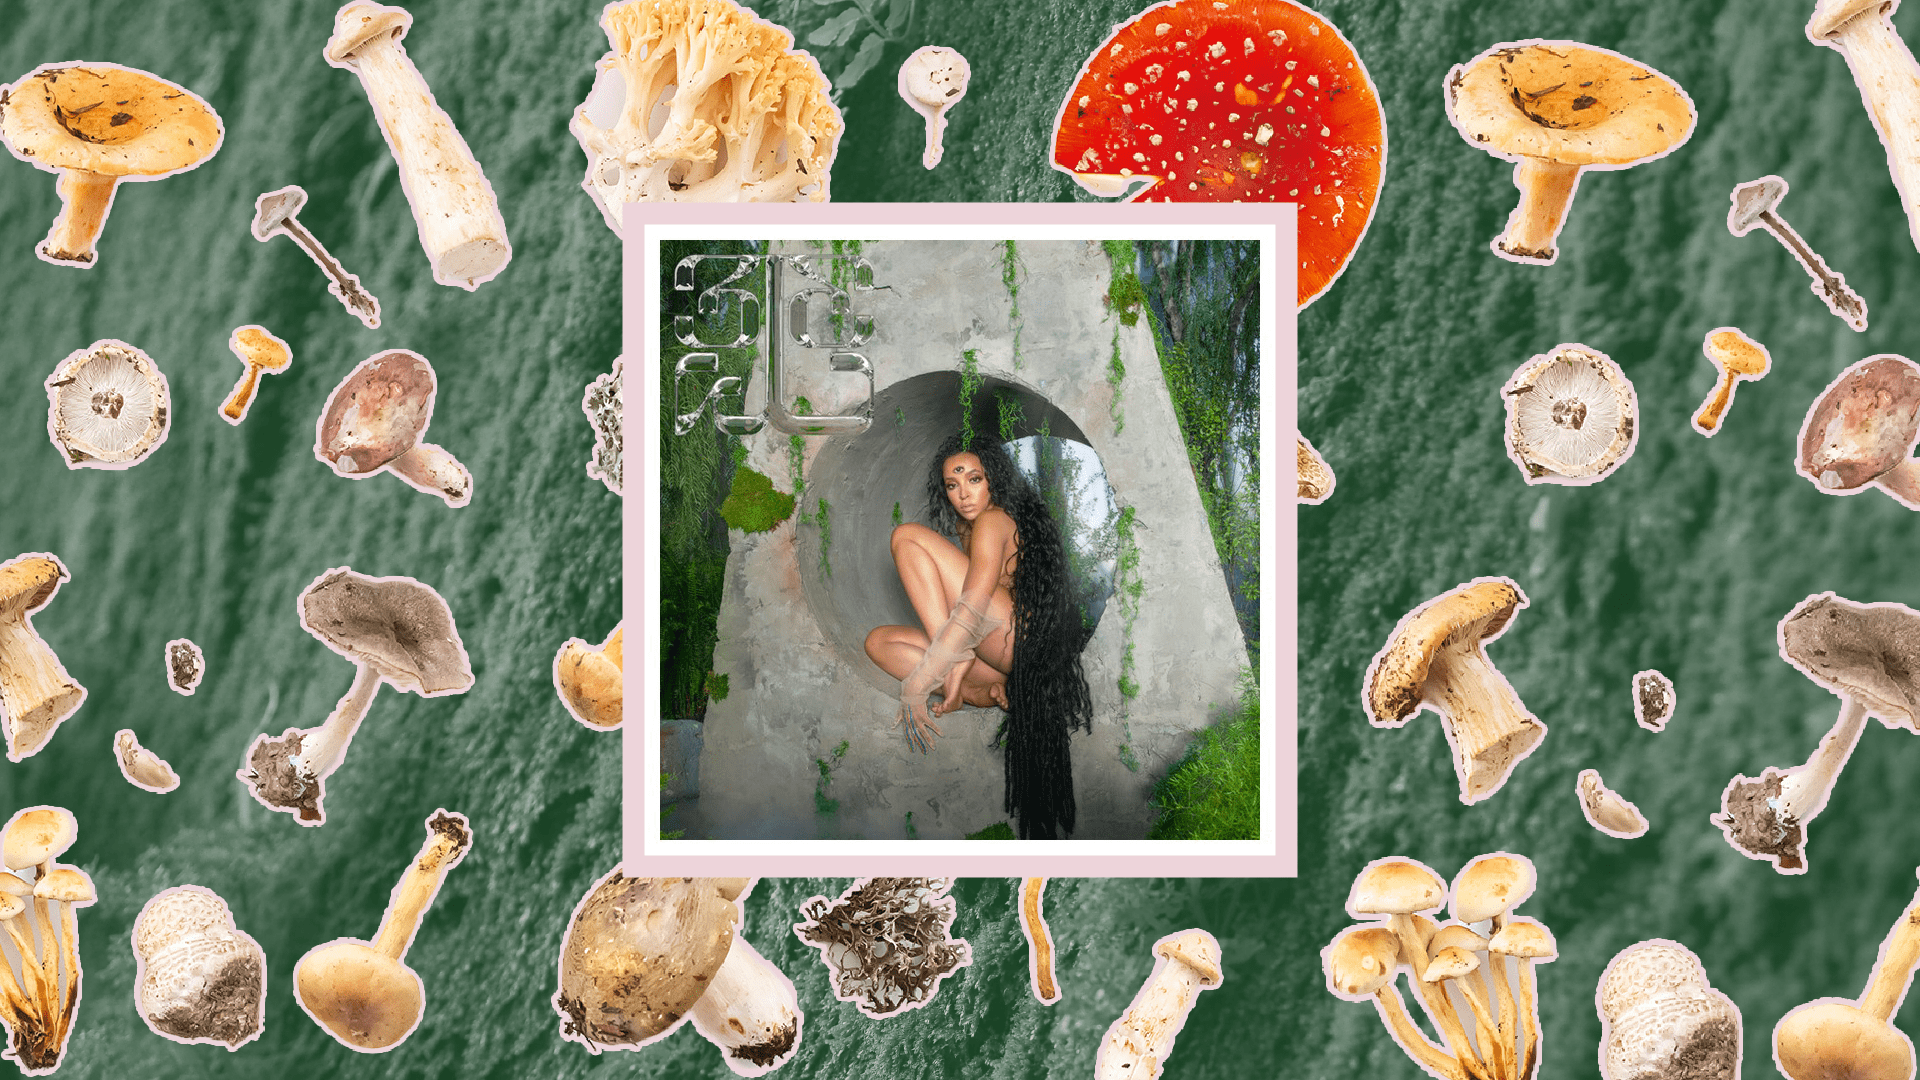 Tinashe's '333' Album cover is situated on a bed of moss surrounded by mushrooms.